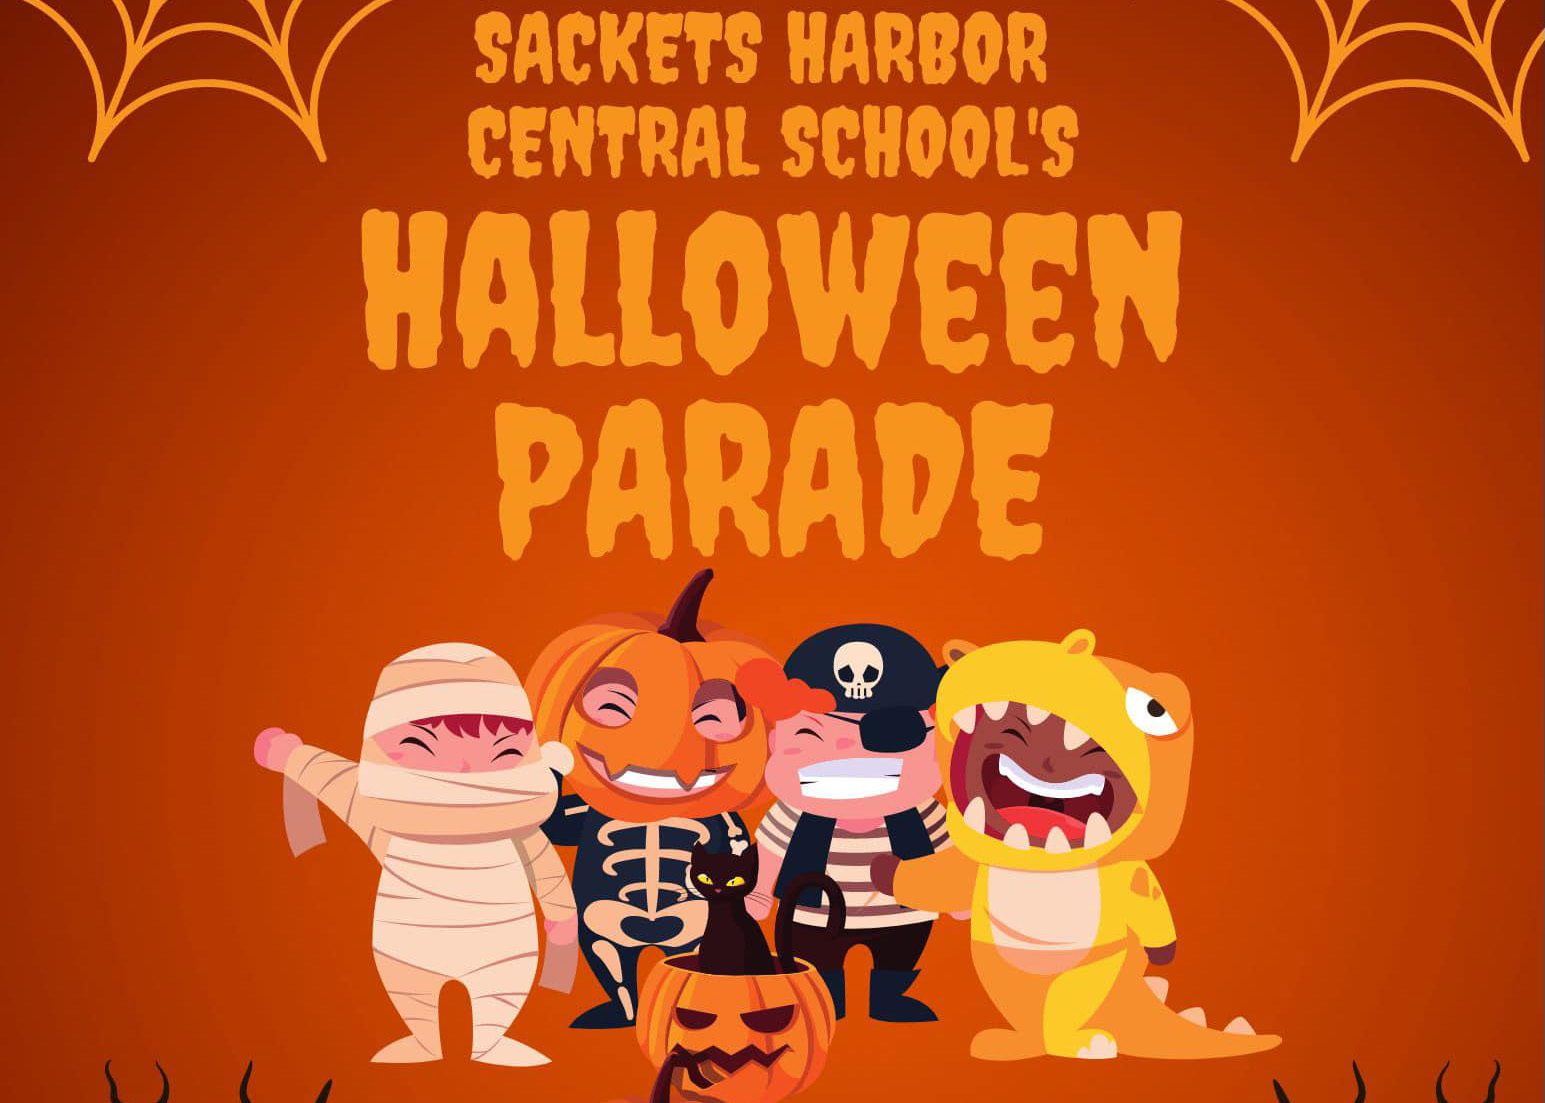 Portion of Sackets Harbor Central School's Halloween Parade Flyer